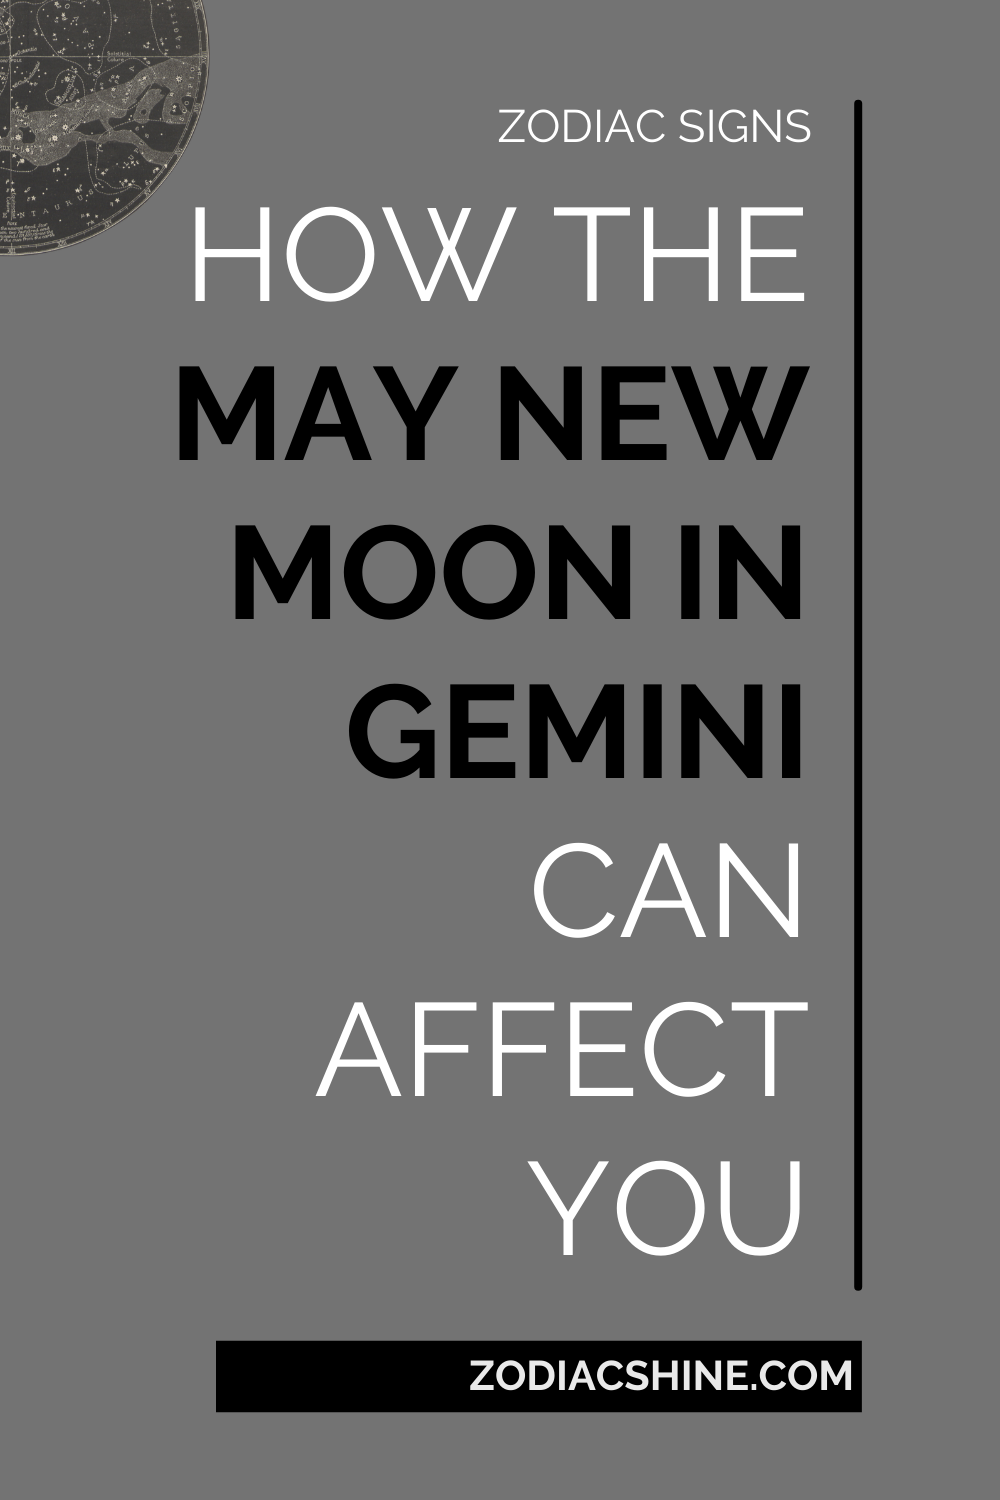 How The May New Moon In Gemini Can Affect You